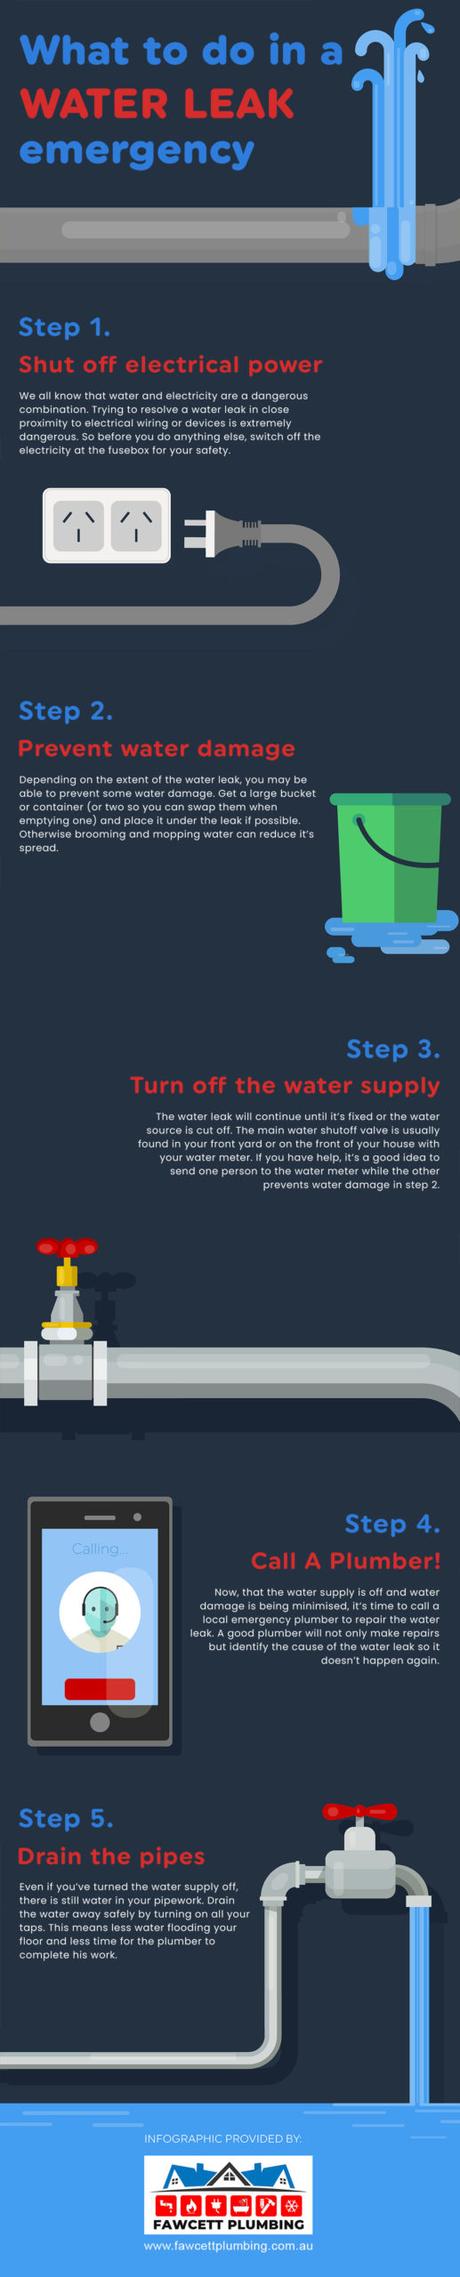 What To Do In A Water Leak Emergency